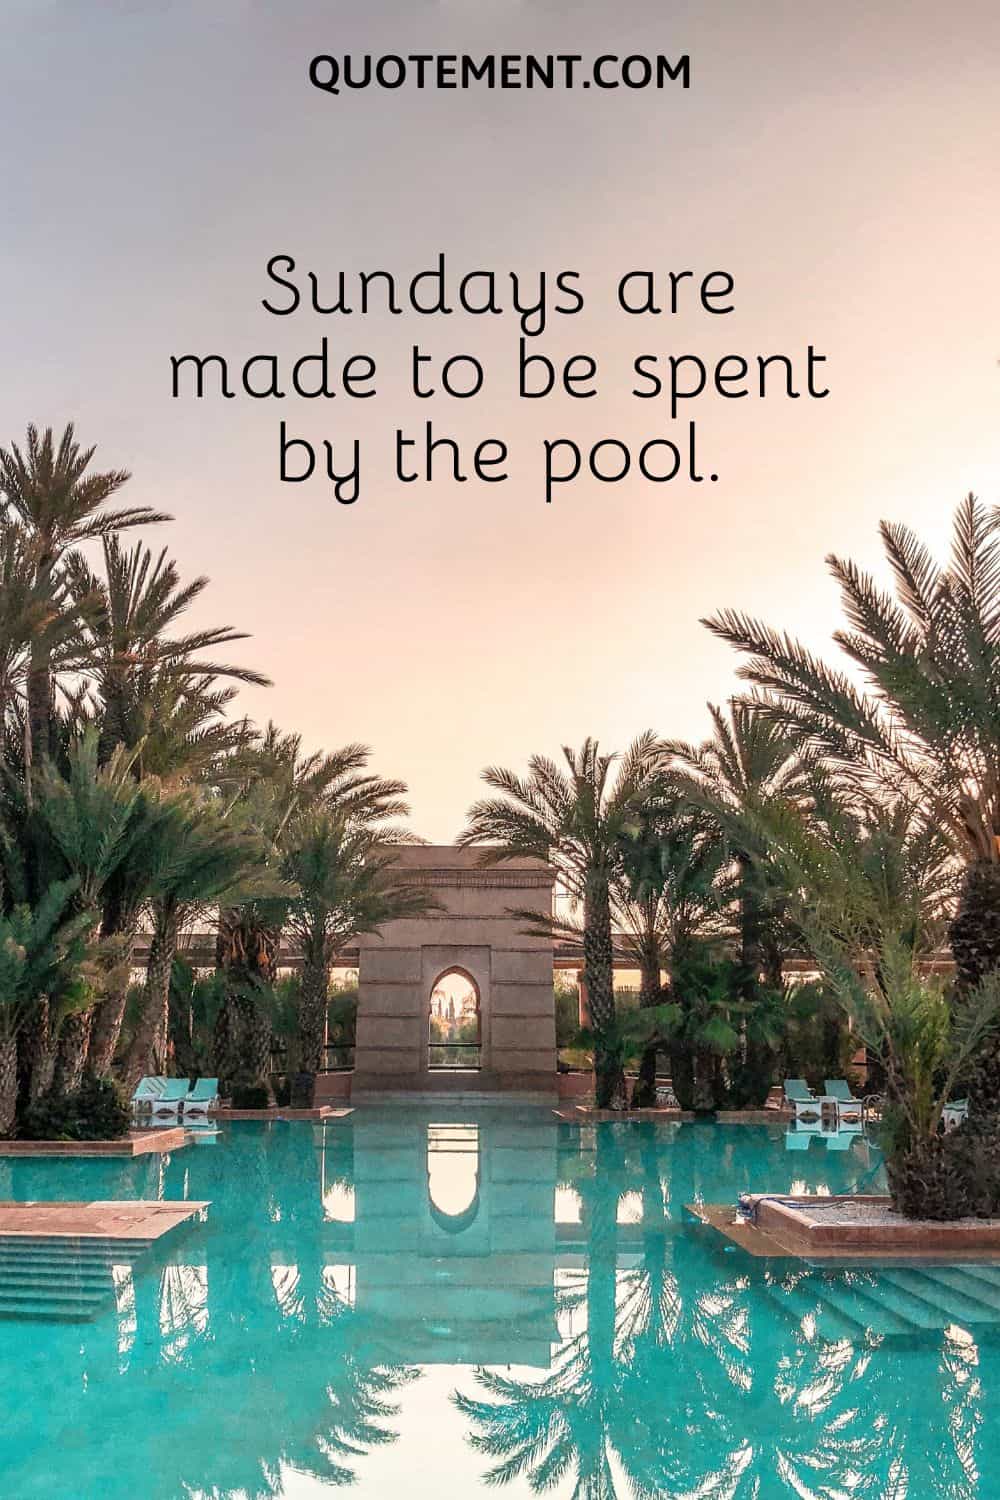 Sundays are made to be spent by the pool.